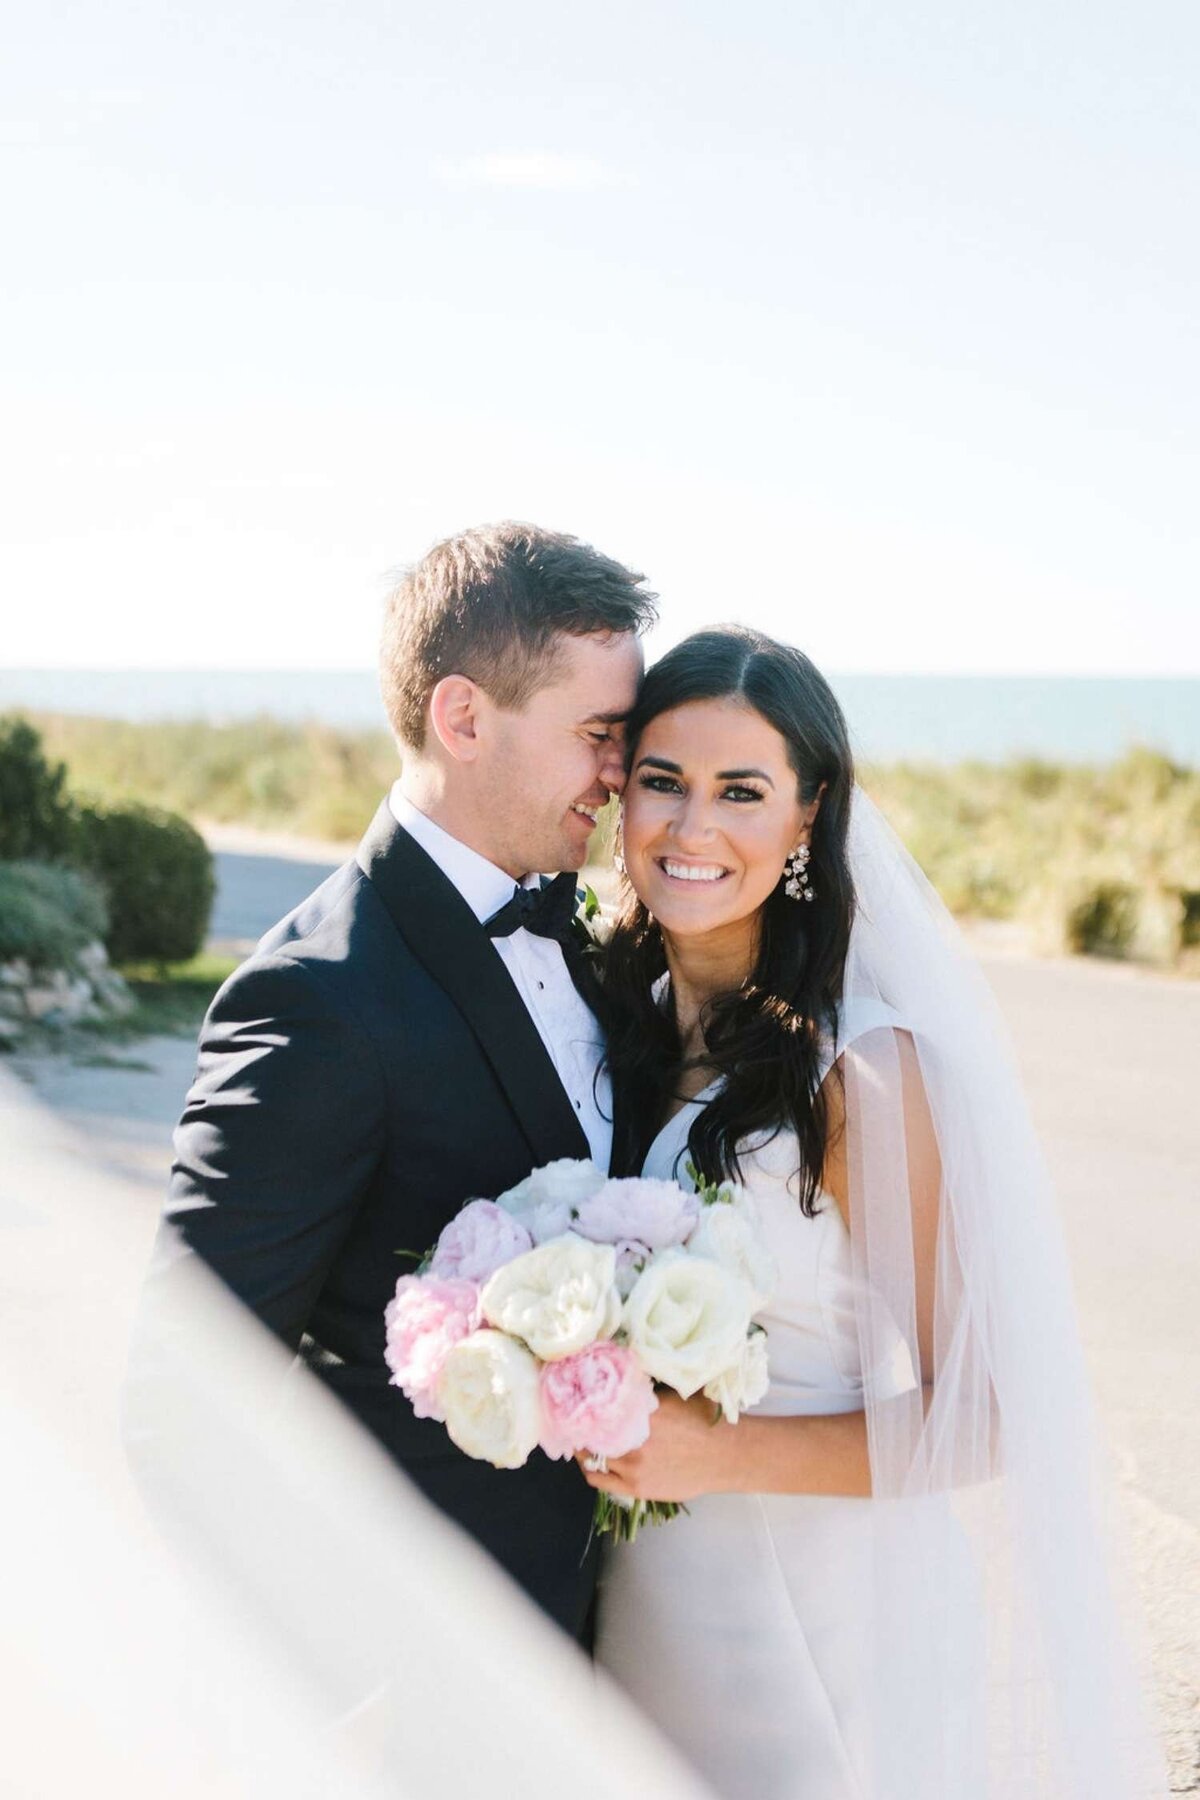 Classic and Elegant  Wedding Portrait along the Beach with a Peony Bouquet for a Luxury Michigan Lakefront Golf Club Wedding.